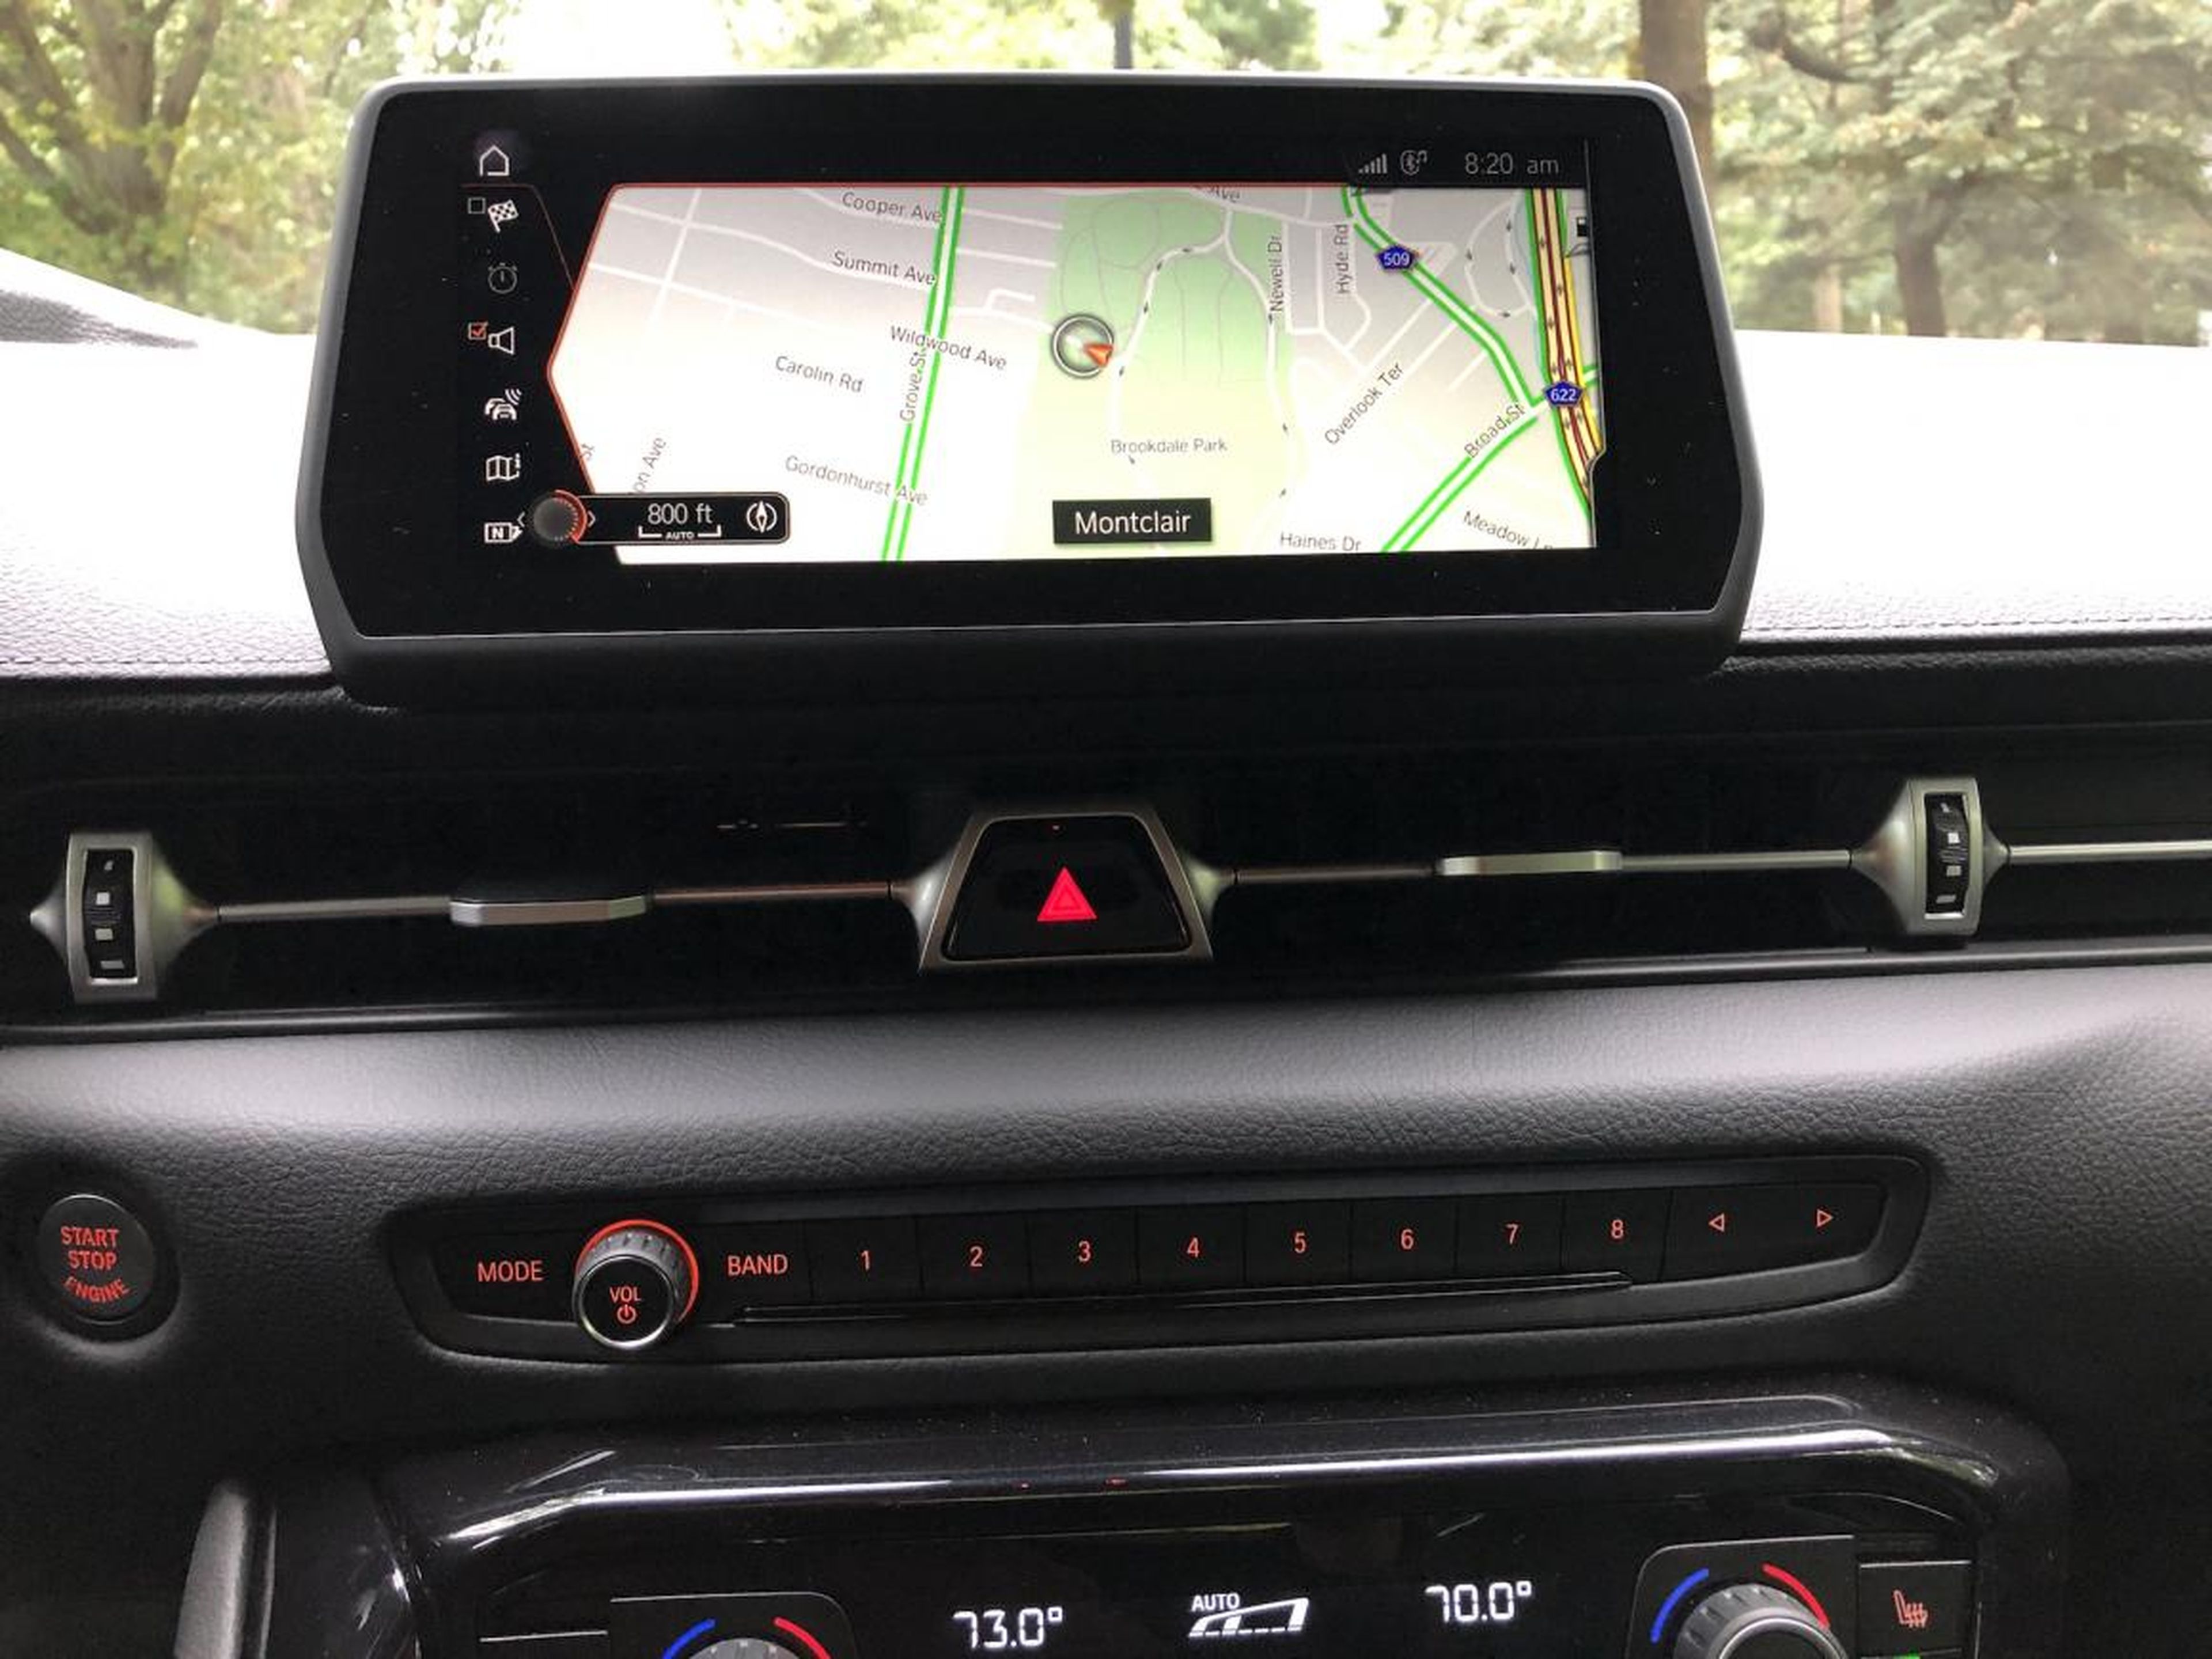 This system, controversial when it launched over a decade ago, has matured into an industry leader. I had no difficulty with GPS navigation, Bluetooth device pairing, connectivity, and I even found the voice-commands to work well,